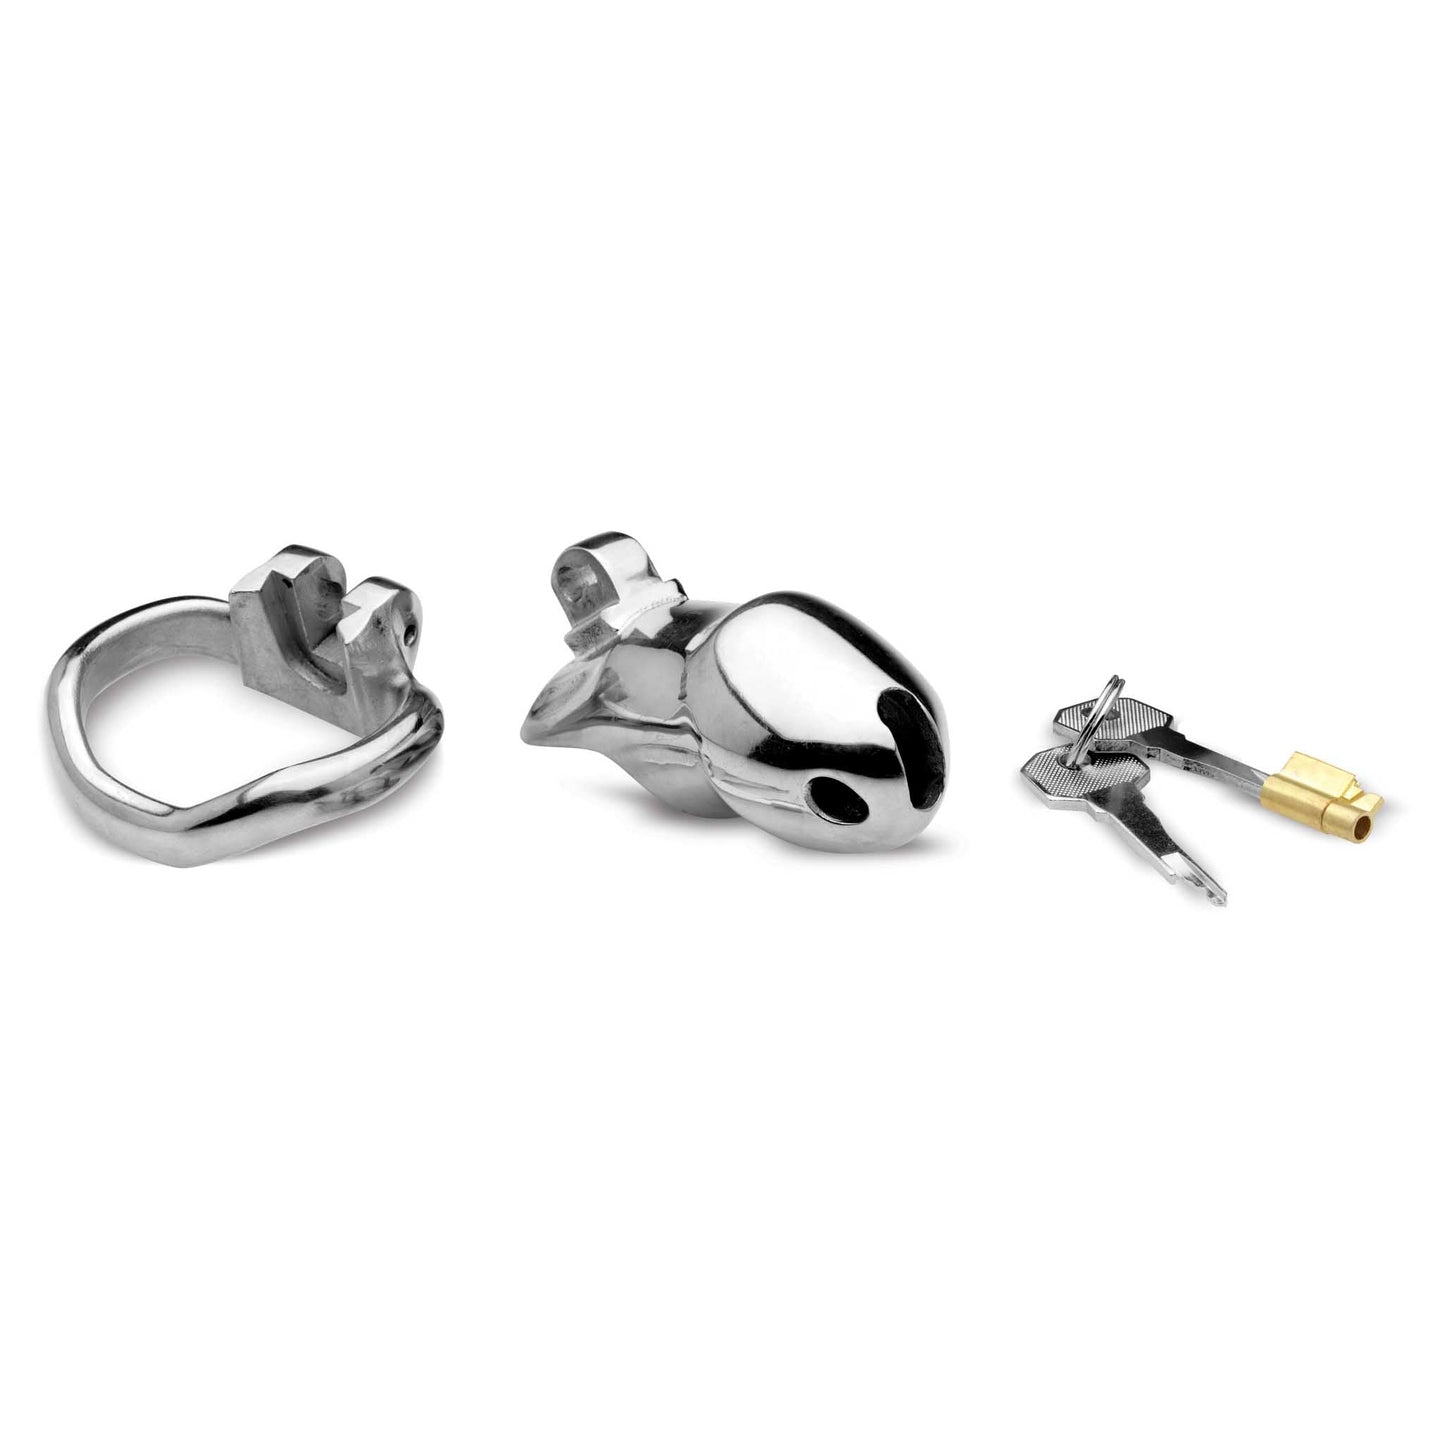 Master Series Rikers 24-7 Stainless Steel Locking Chastity Cage